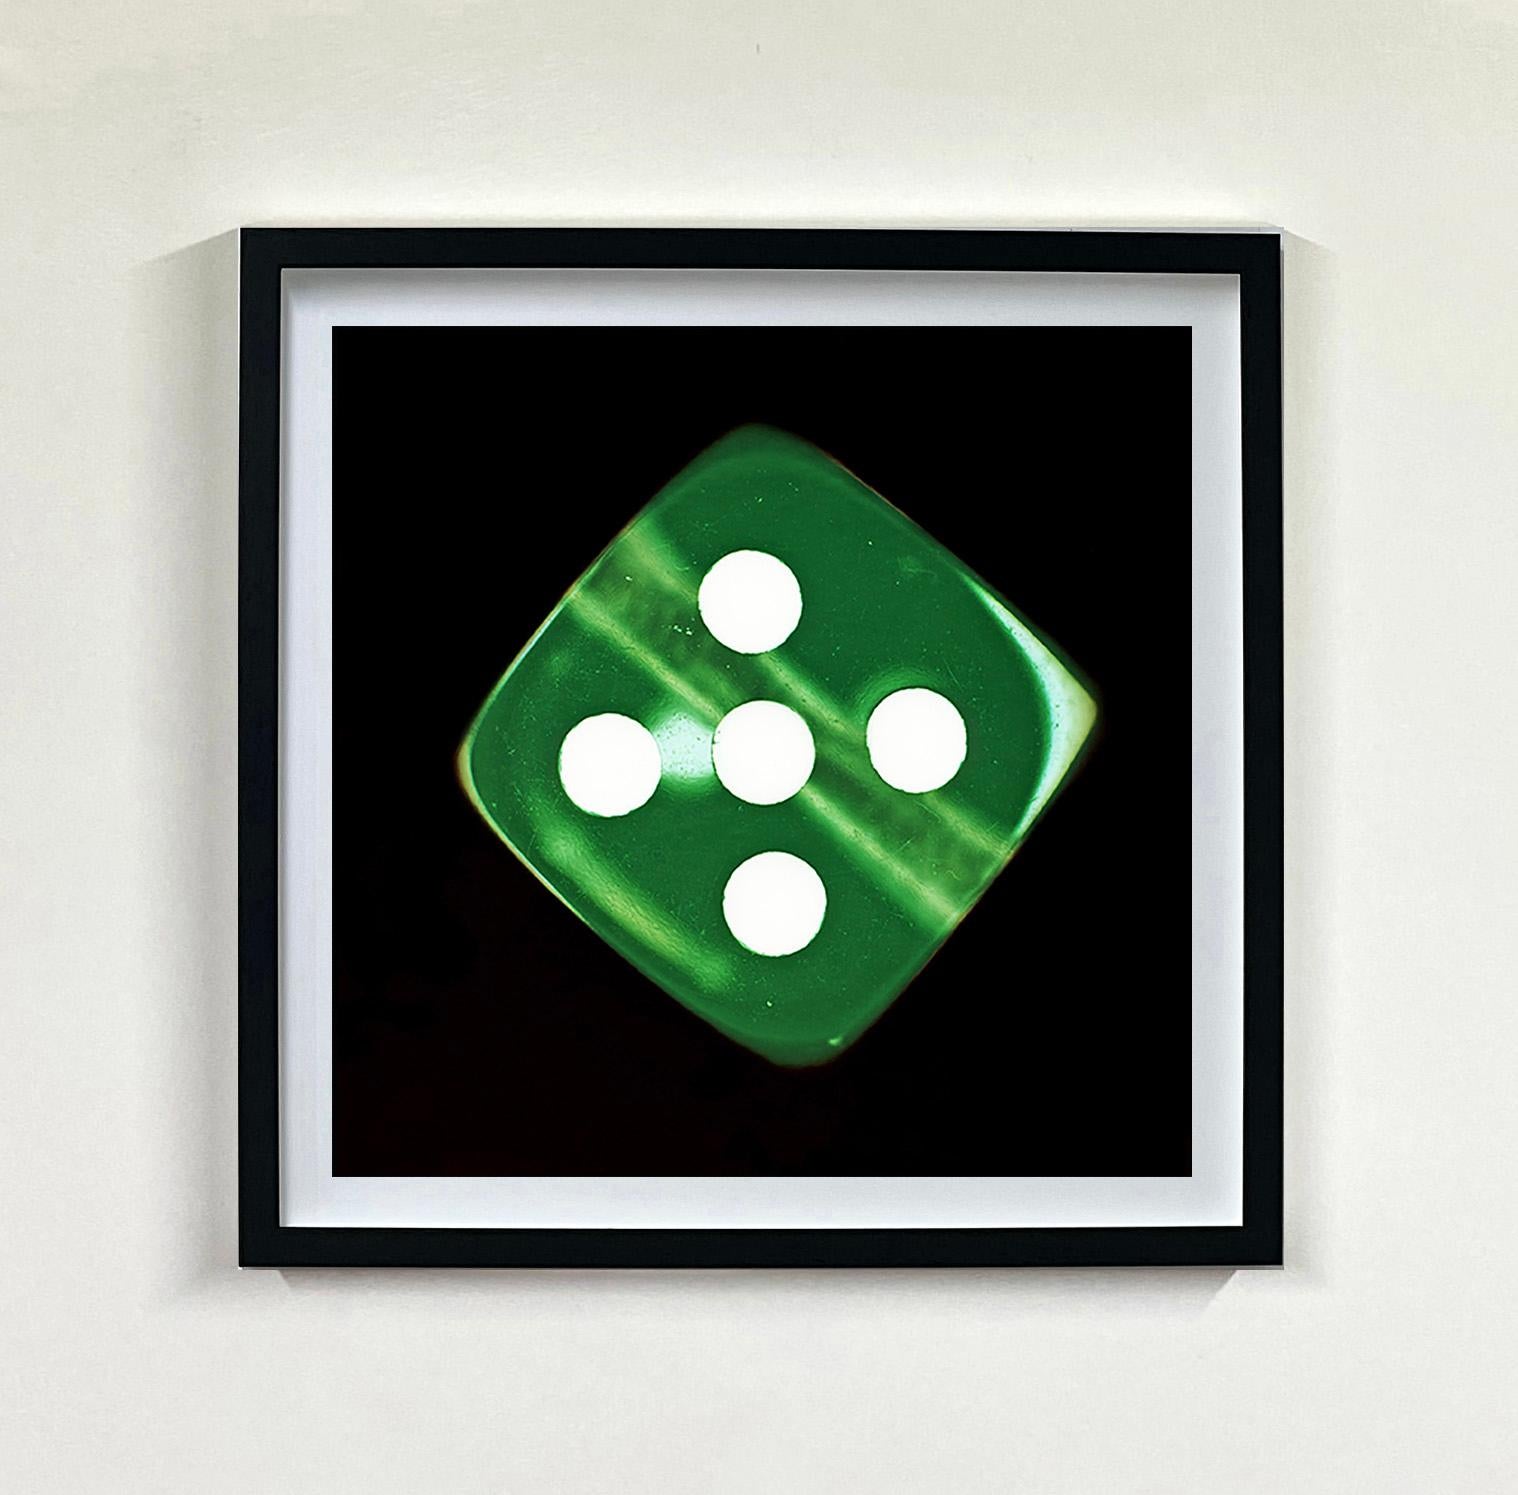 Dice Series, Green Five - Conceptual Color Photography - Pop Art Print by Heidler & Heeps